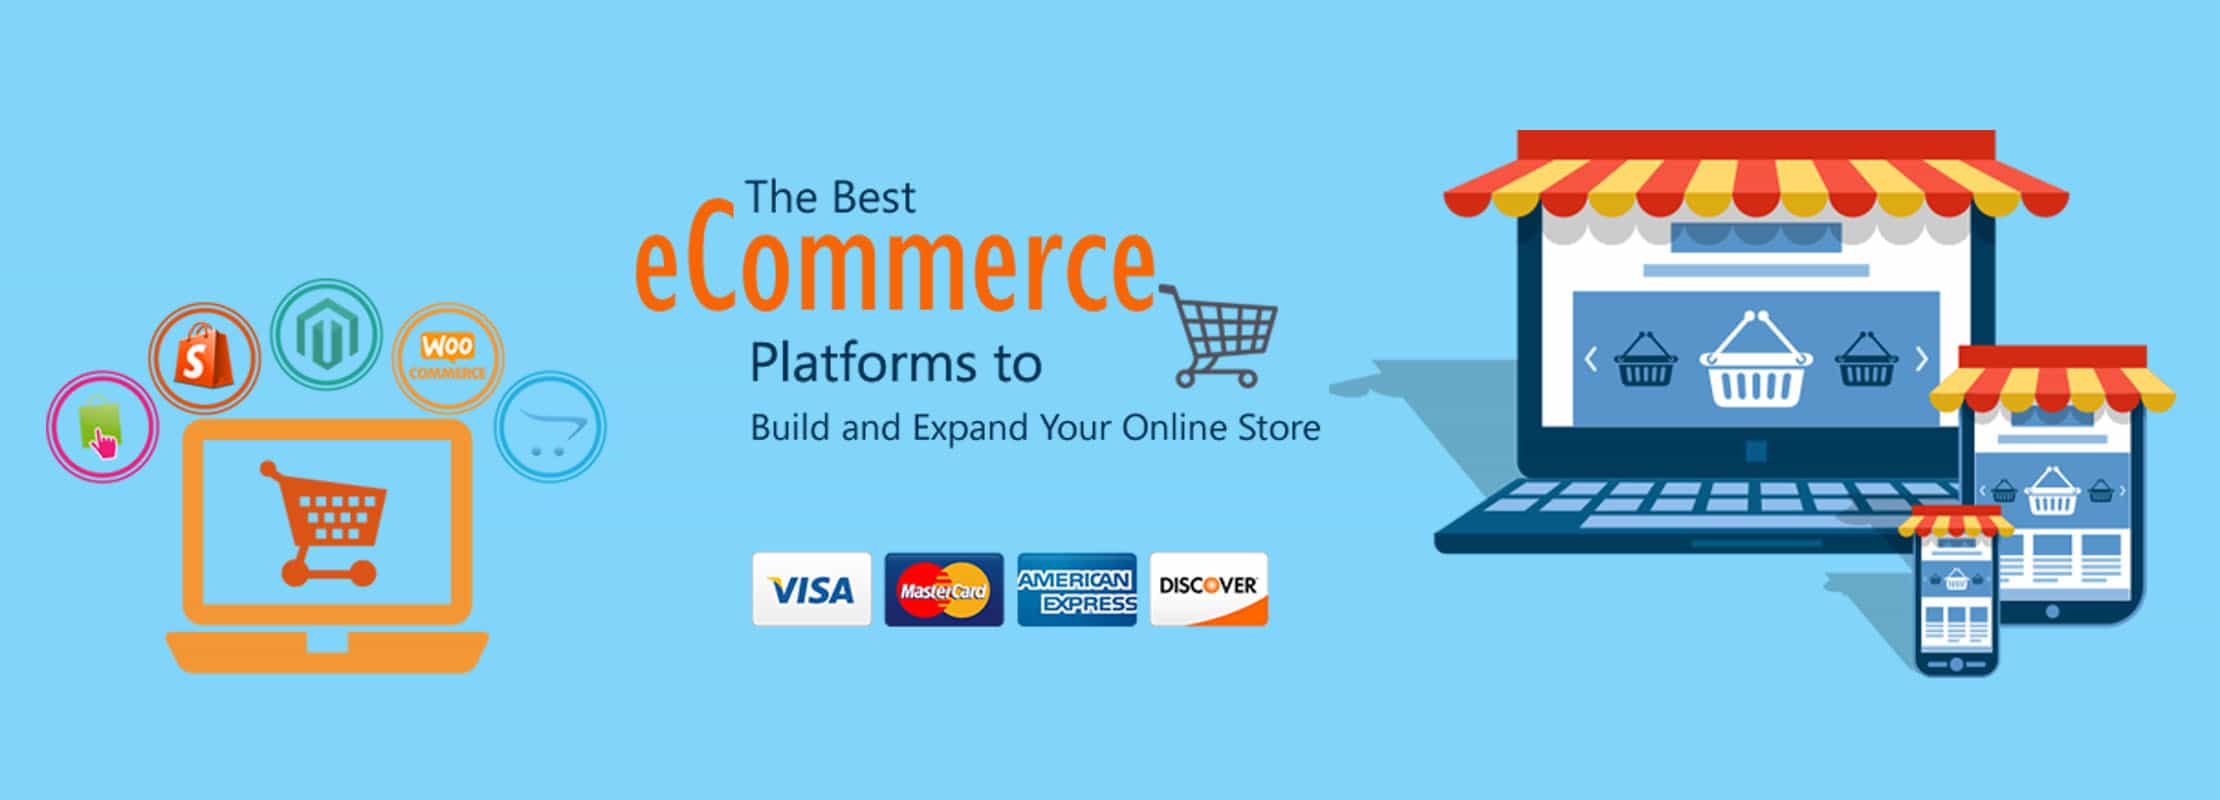 credit & debit cards, carts with best ecommerce platform as heading|web design company in kerala